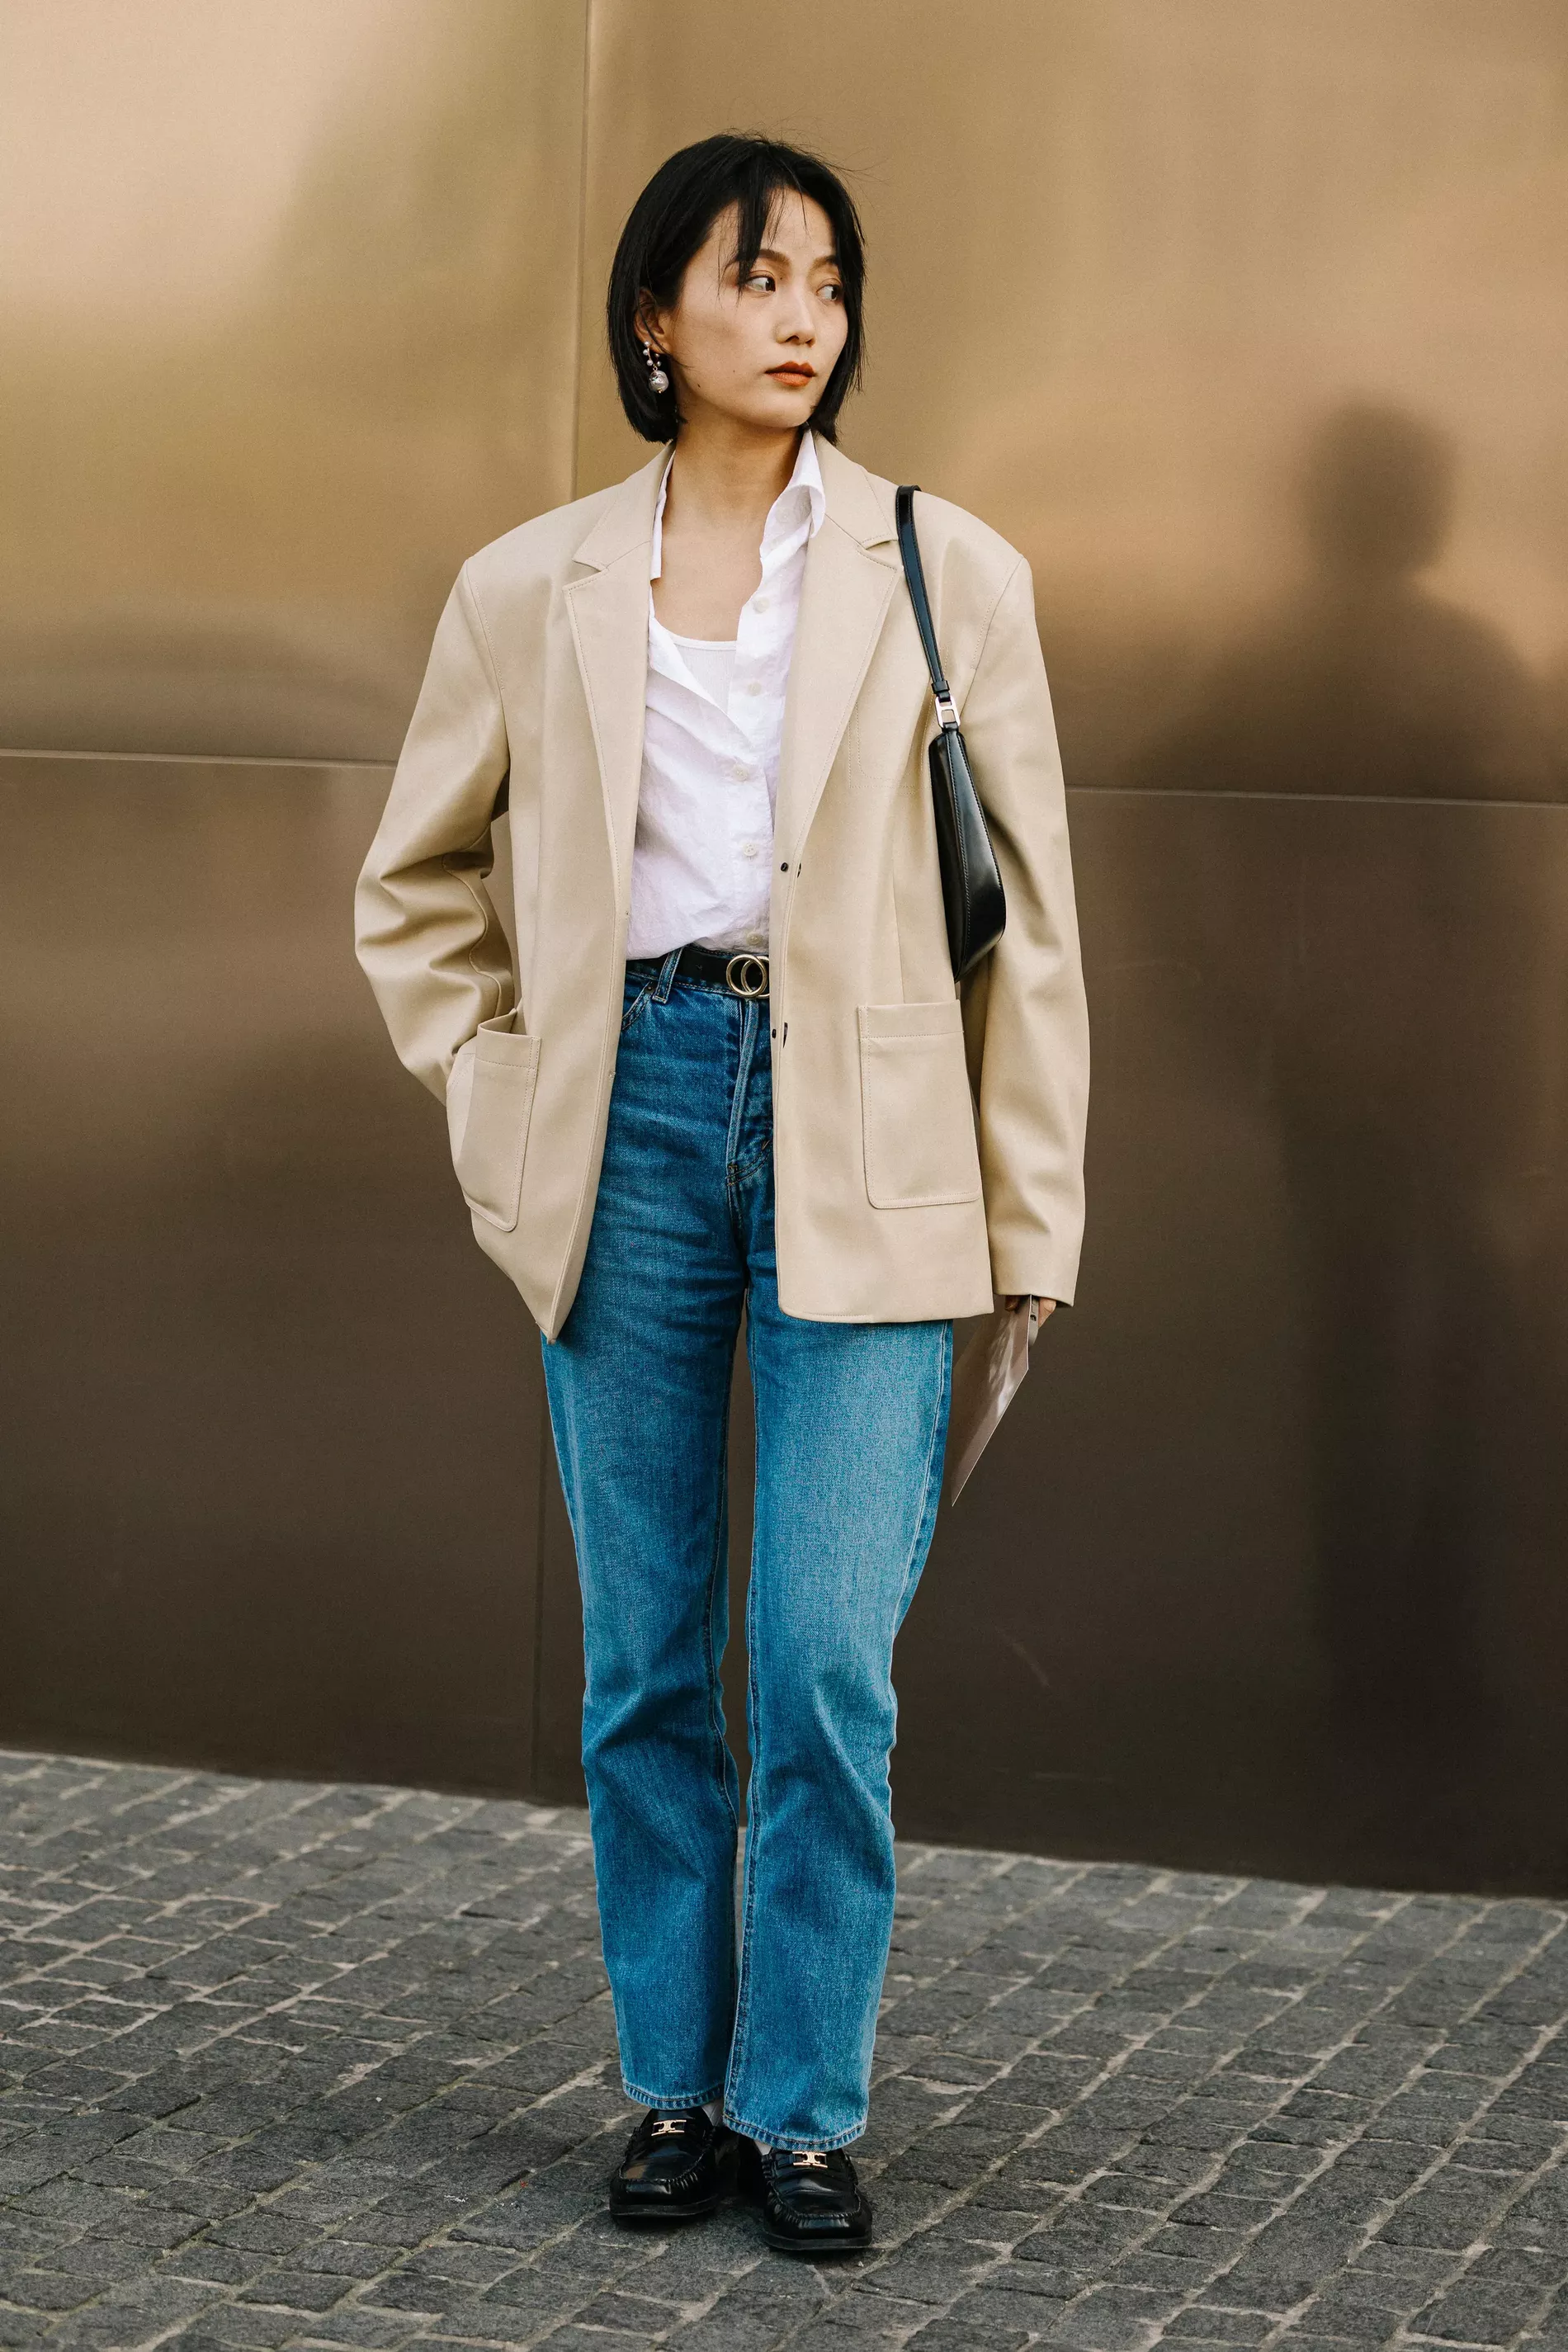 Shanghai Fashion Week SS23 guest wears cream blazer over white shirt and jeans 